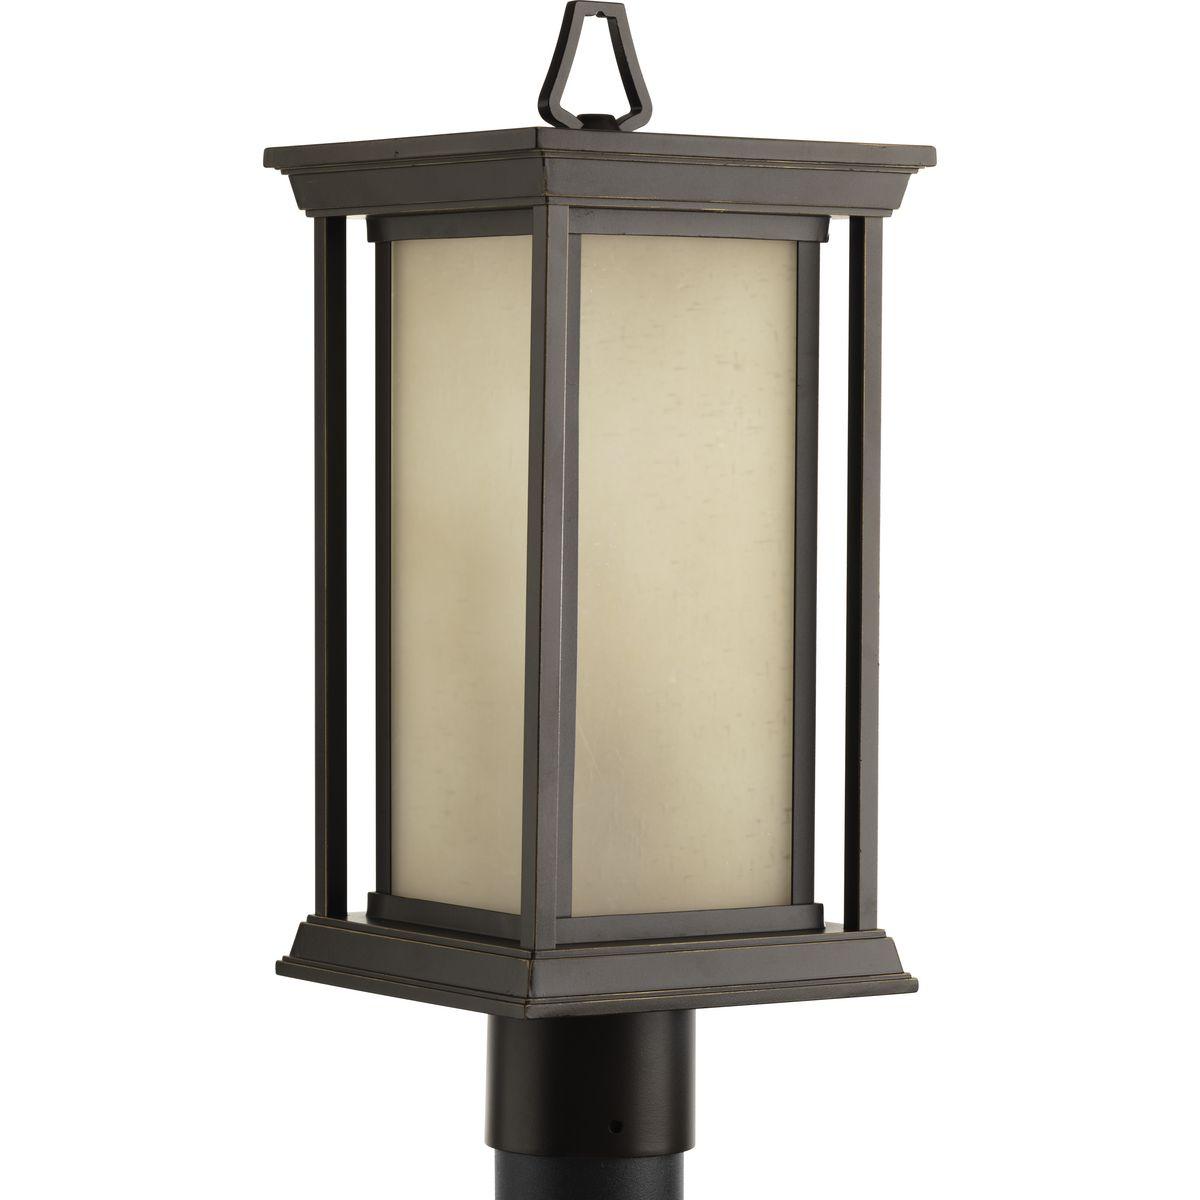 Hubbell P5400-20 One-light post lantern with a Craftsman-inspired modern silhouette, Endicott offers visual interest when both lit and unlit. The elongated frame is elegantly finished with linen glass diffuser.  ; Craftsman-inspired modern silhouette. ; Visually appealing